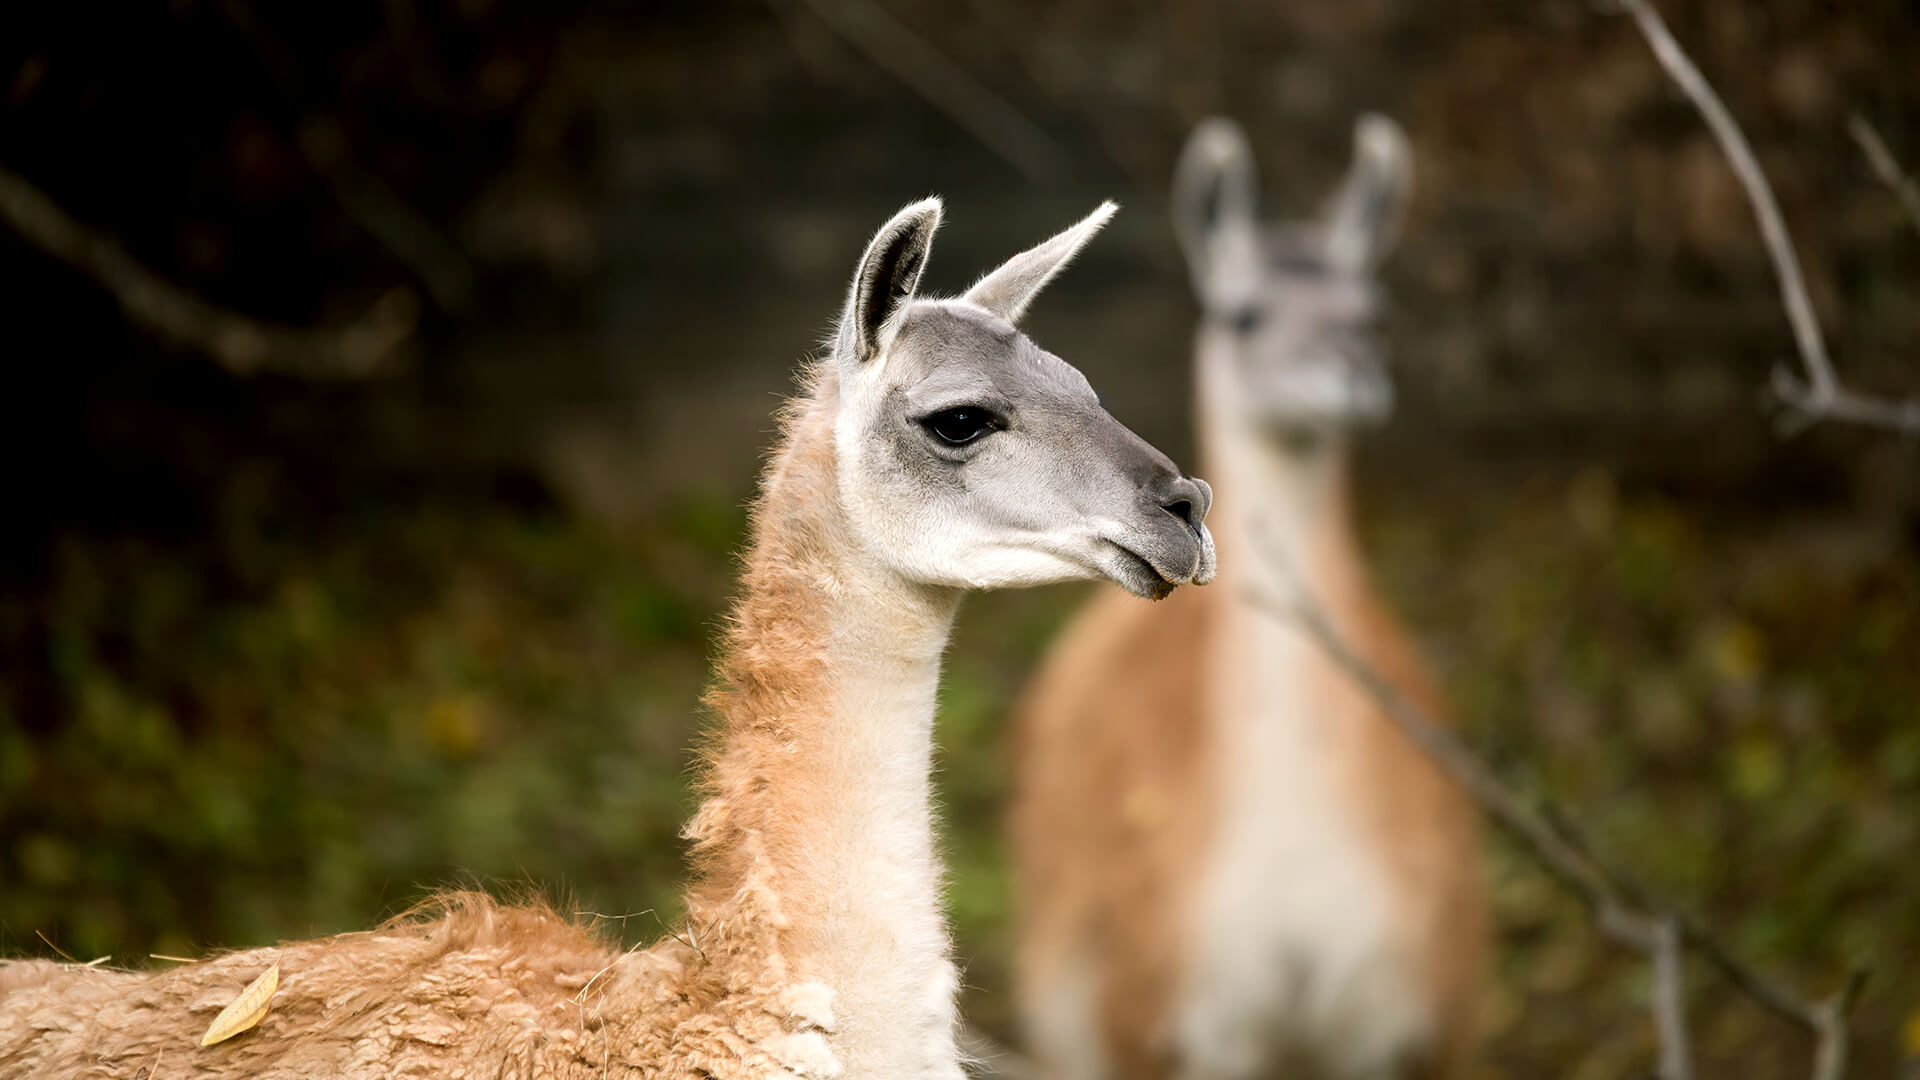 A pair of guanacos from Argentina